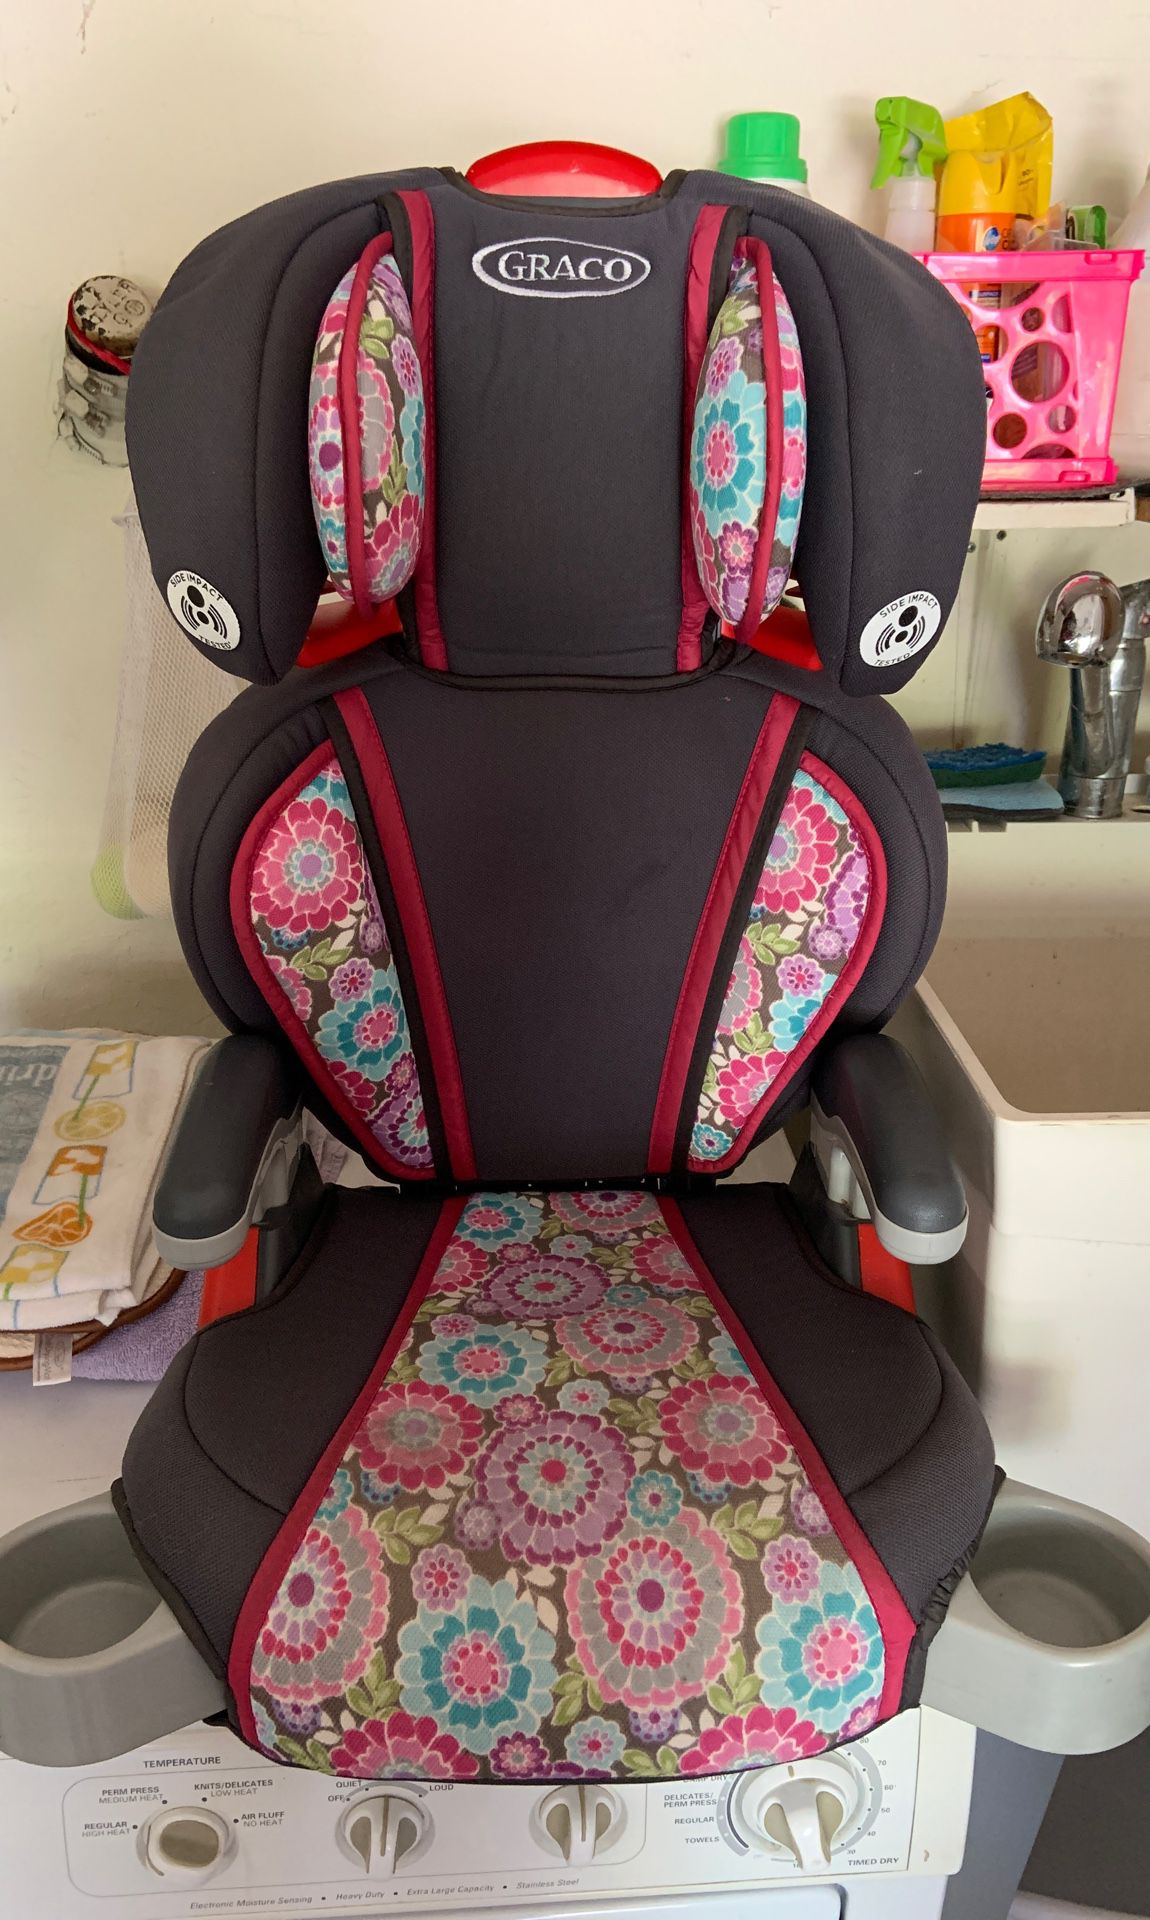 Graco booster car seat. Âge 3 +